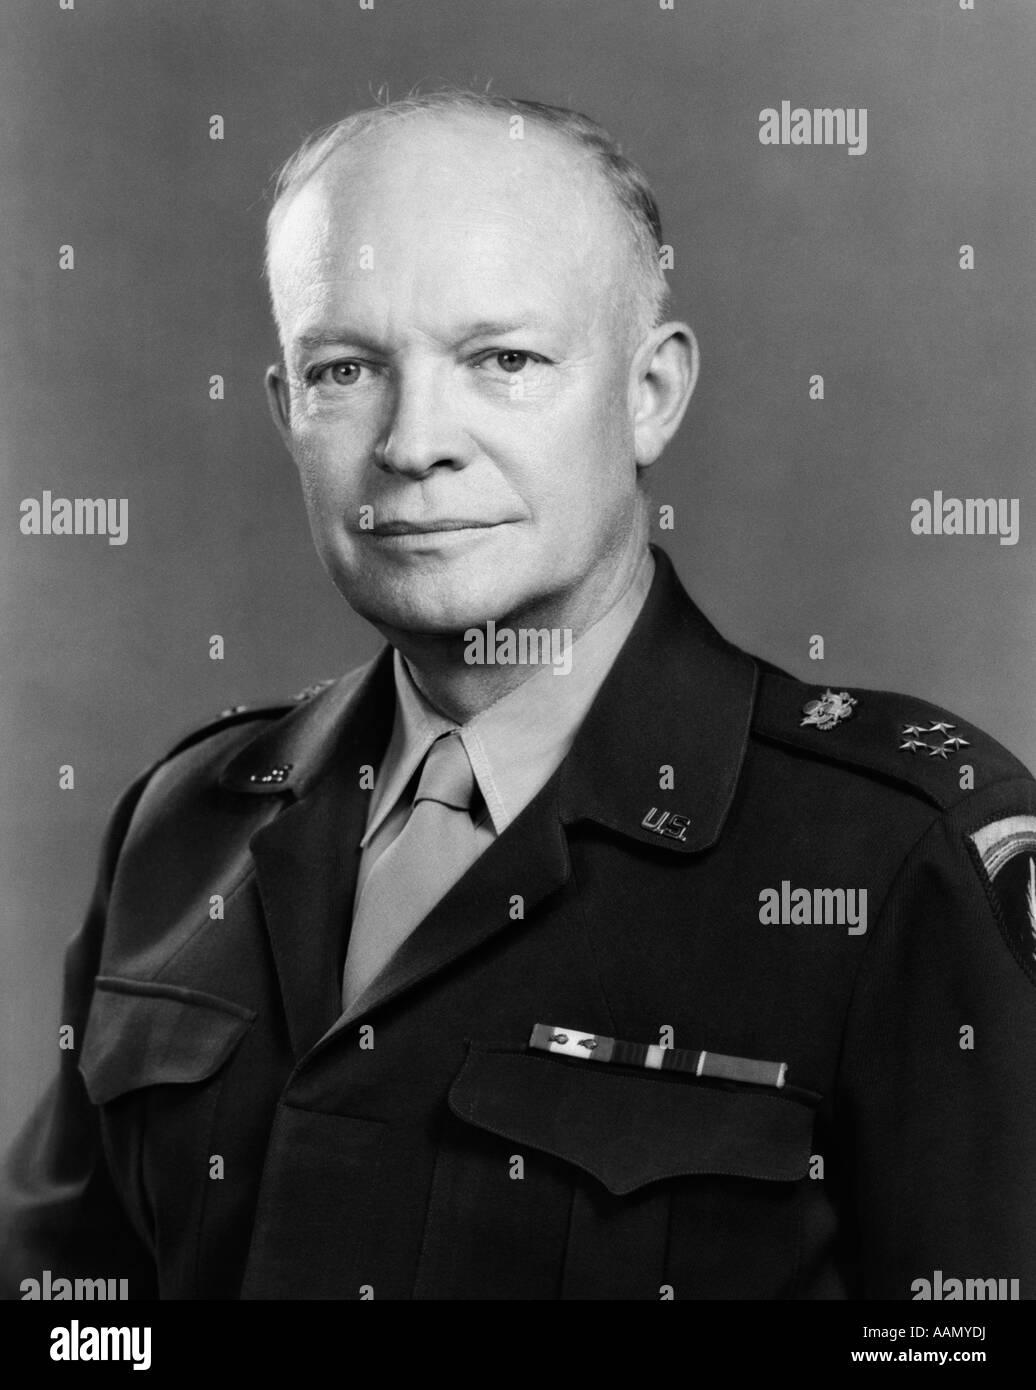 1940s PORTRAIT OF FIVE STAR GENERAL OF THE ARMIES DWIGHT D. EISENHOWER LATER 34TH PRESIDENT OF THE UNITED STATES Stock Photo